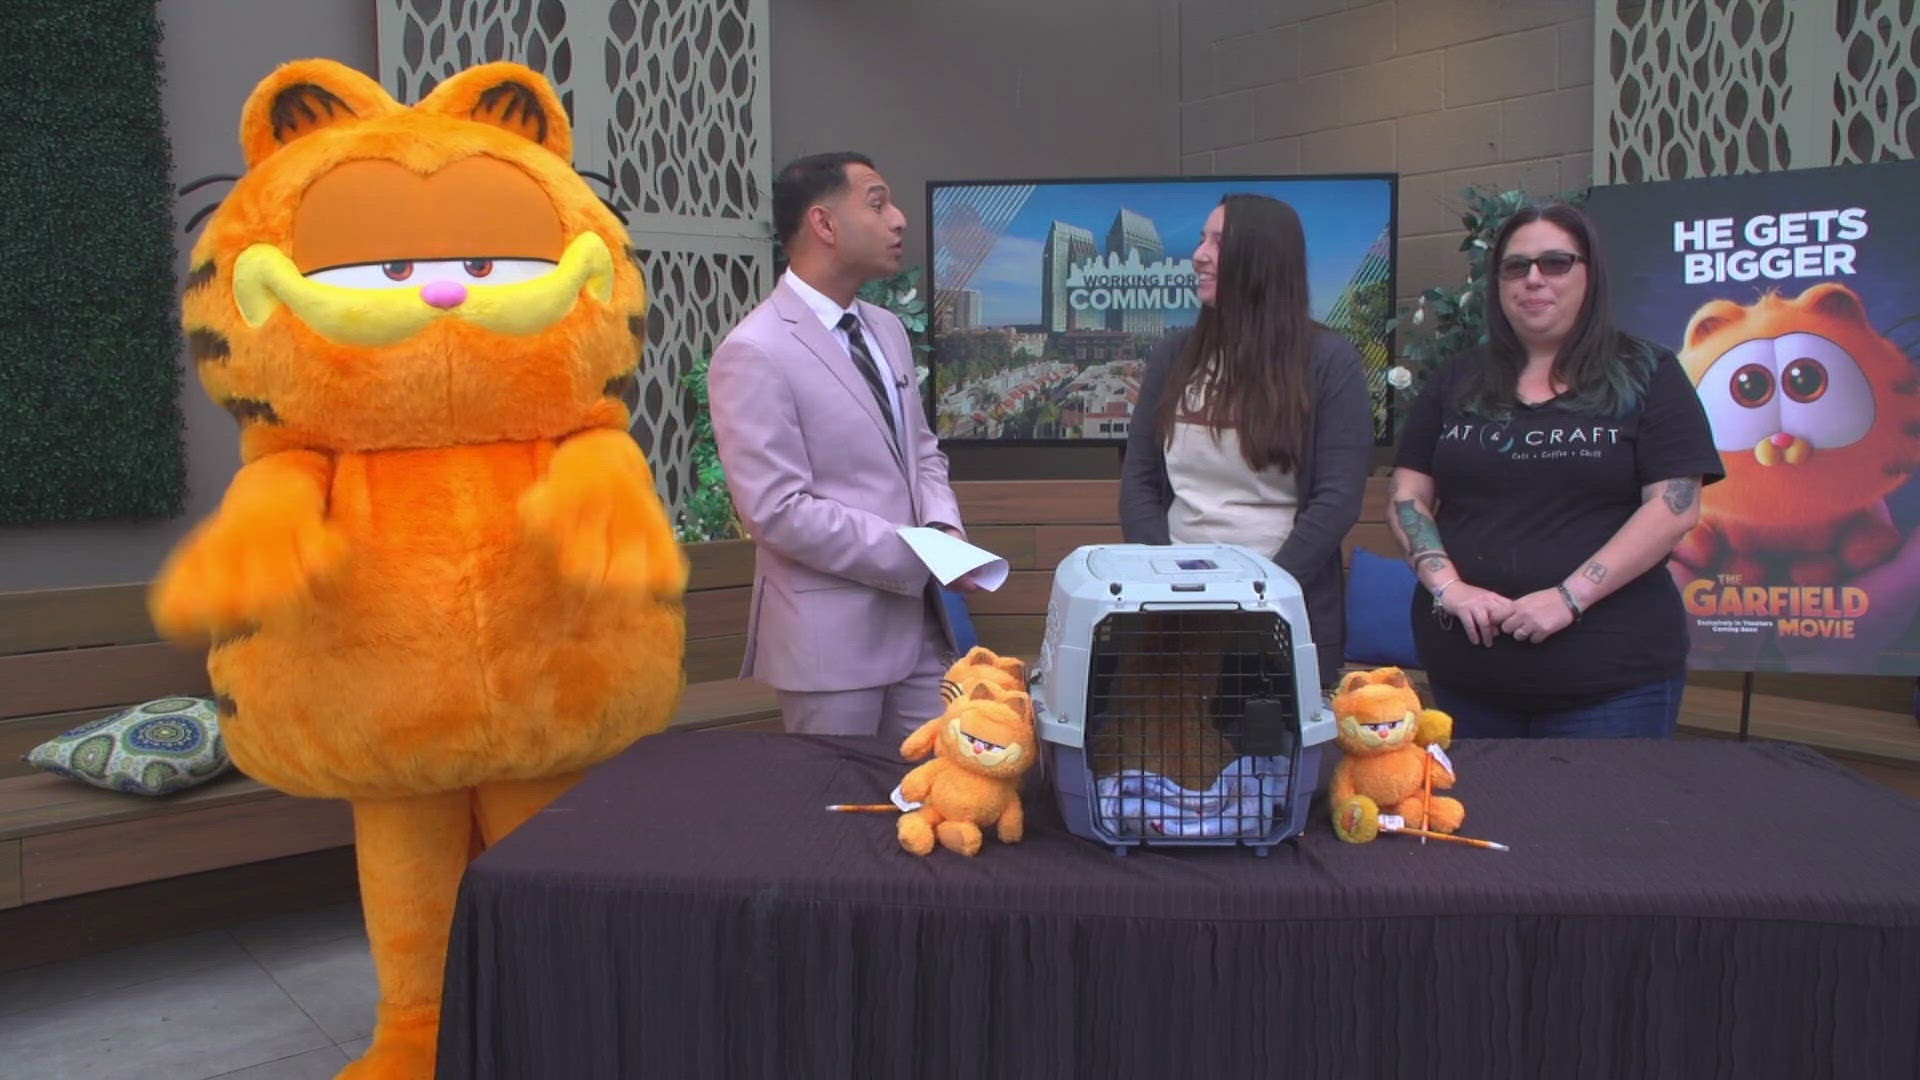 Cat cafes in San Diego and Vista are having special giveaways to celebrate the upcoming Garfield movie.